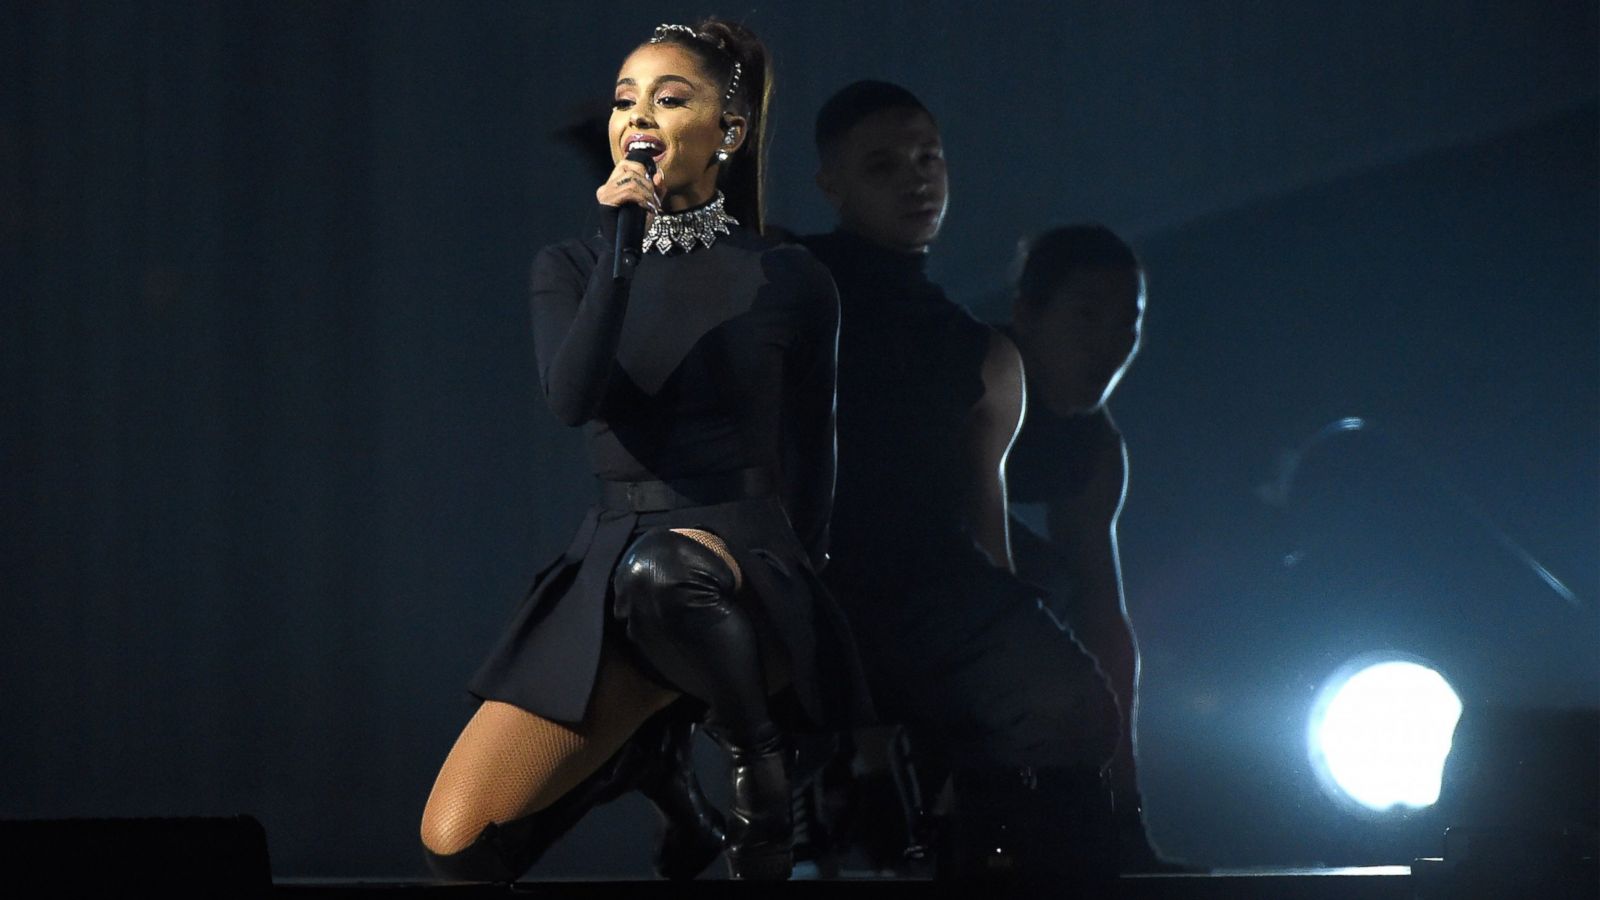 Ariana Grande's Manchester concert filled with young fans who call themselves Arianators